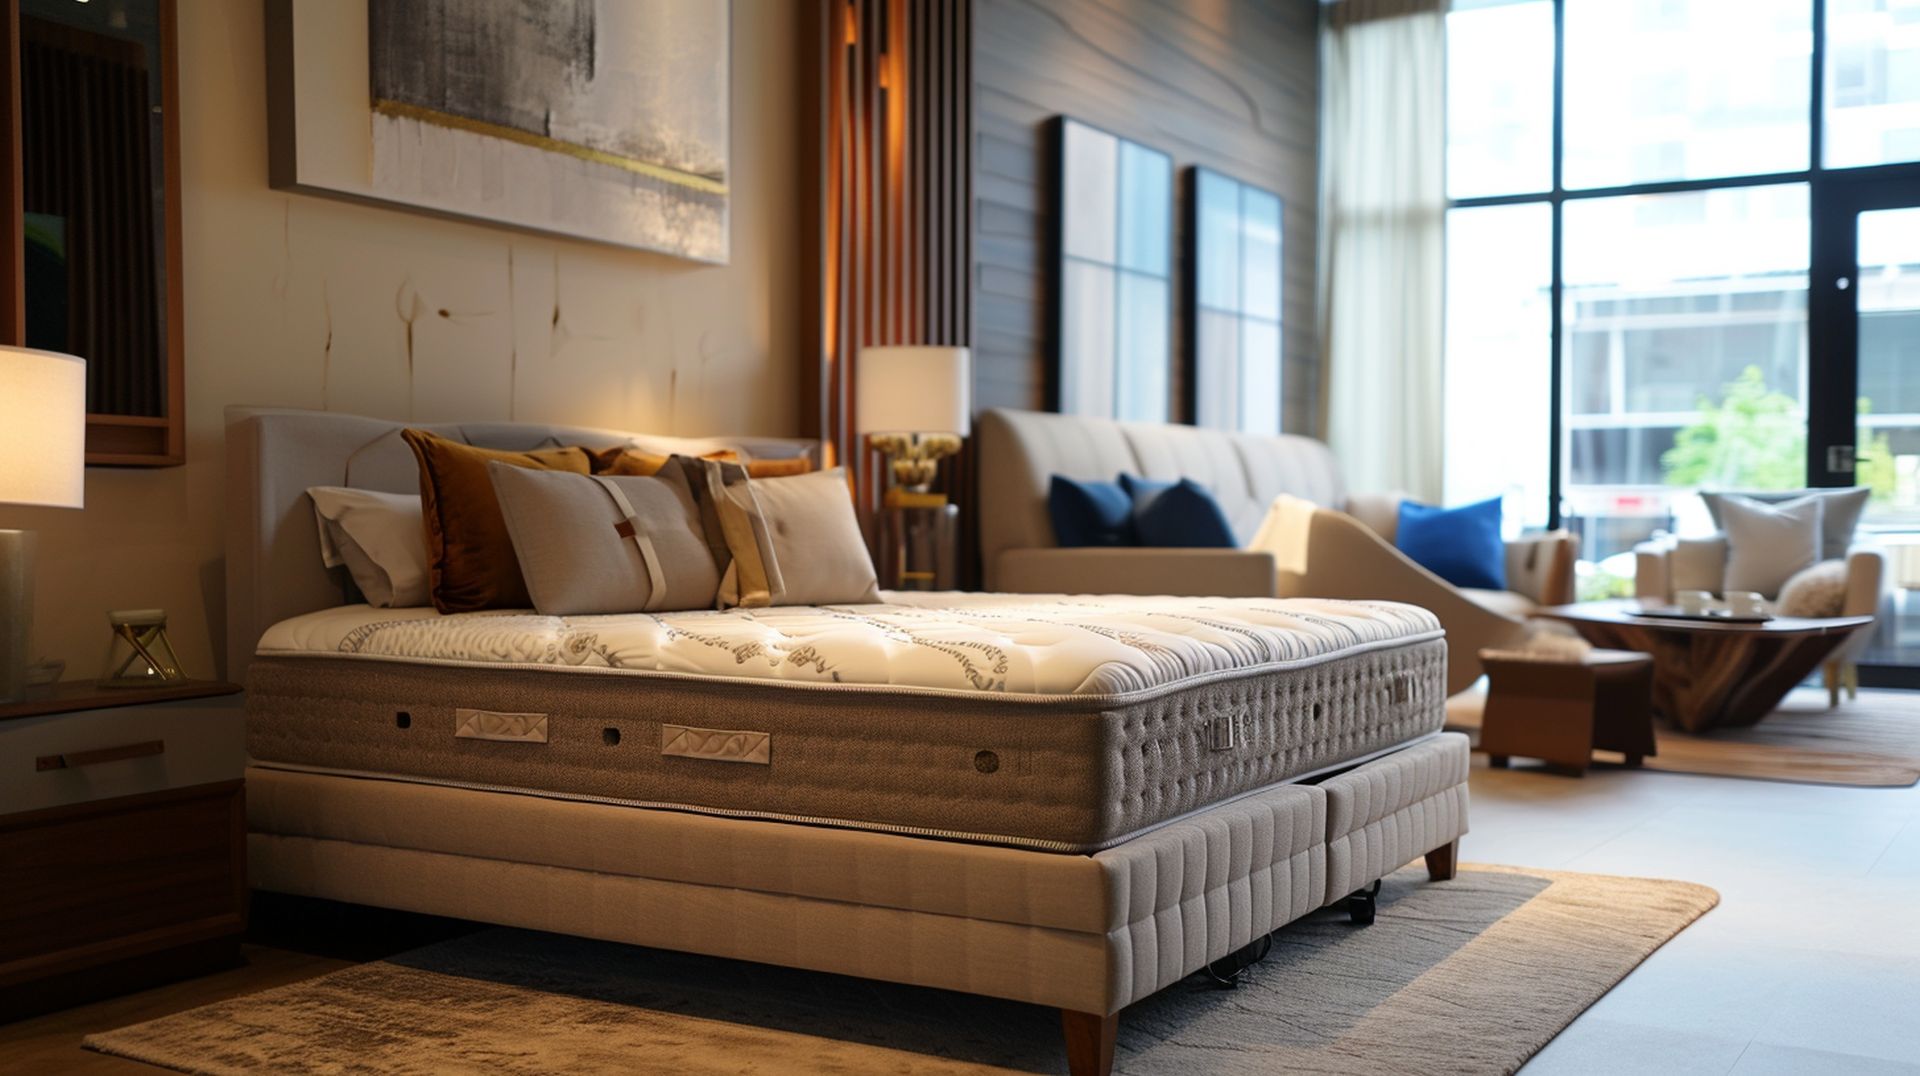 If you're looking for a new bed, mattress stores in Westminster offer the best customer and delivery service, financing, and warranties in Colorado